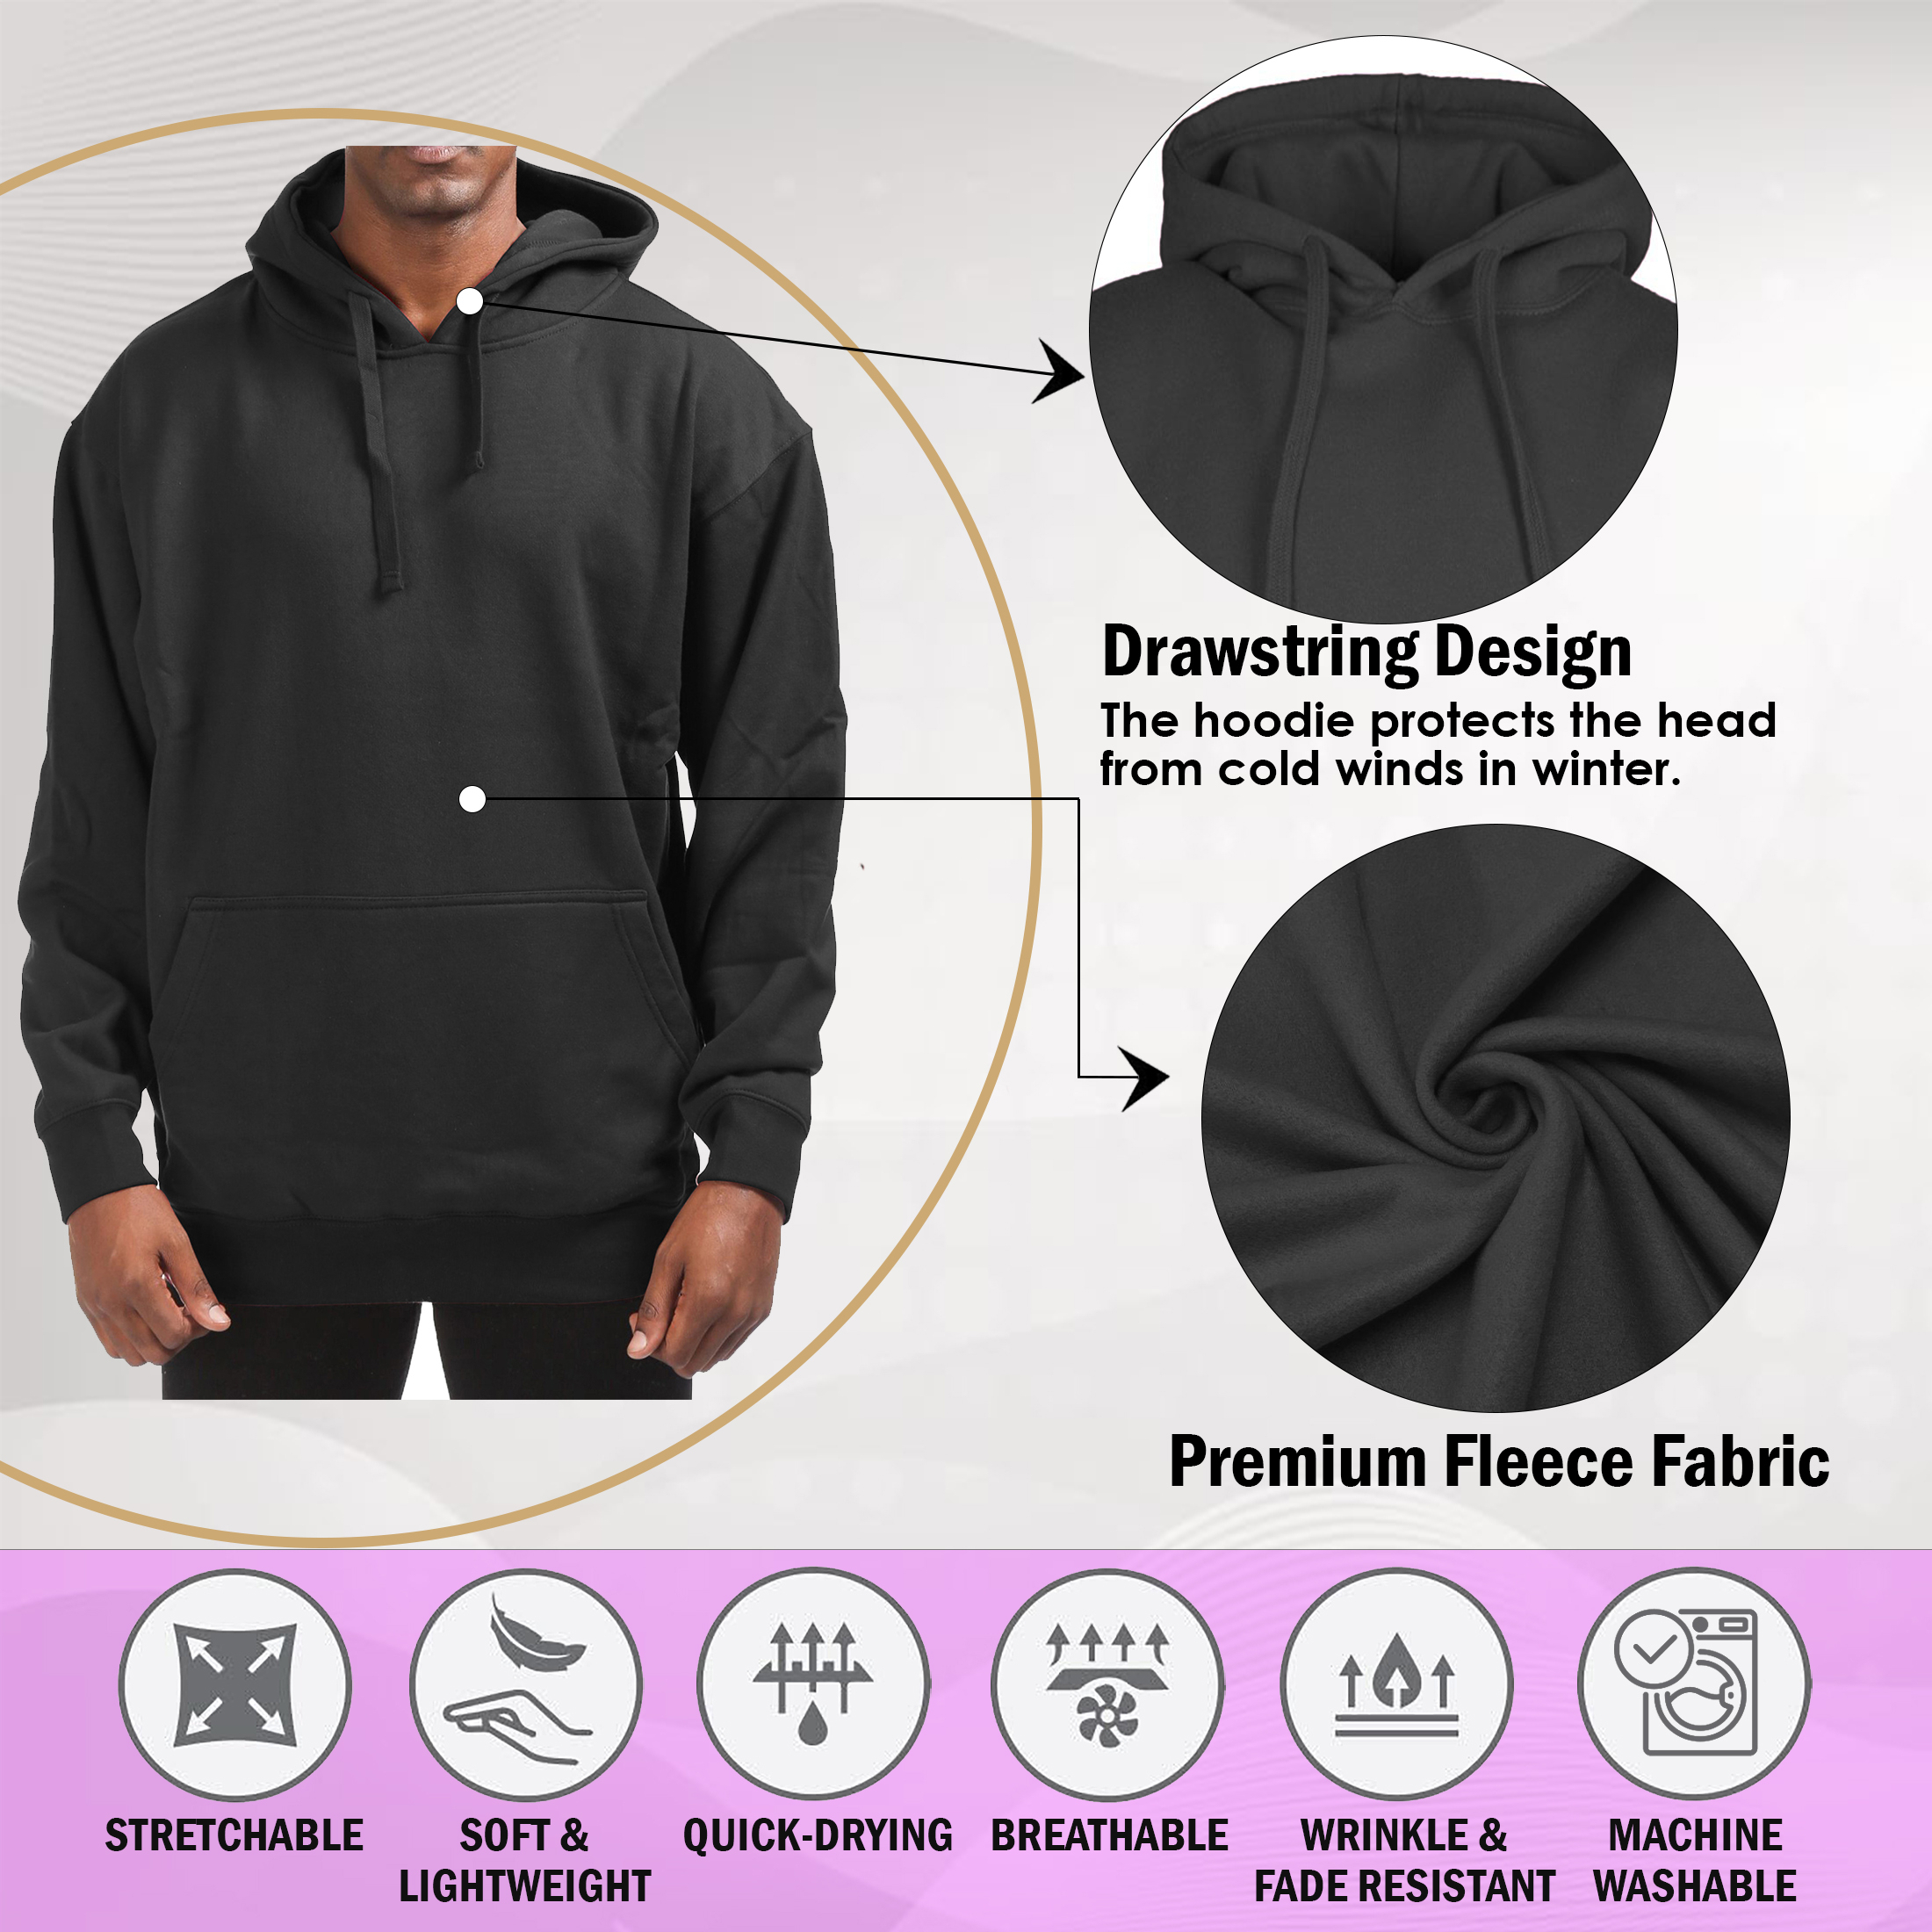 Men's Cotton-Blend Fleece Pullover Hoodie With Pocket (Big & Tall Sizes Available) - Navy, X-Large